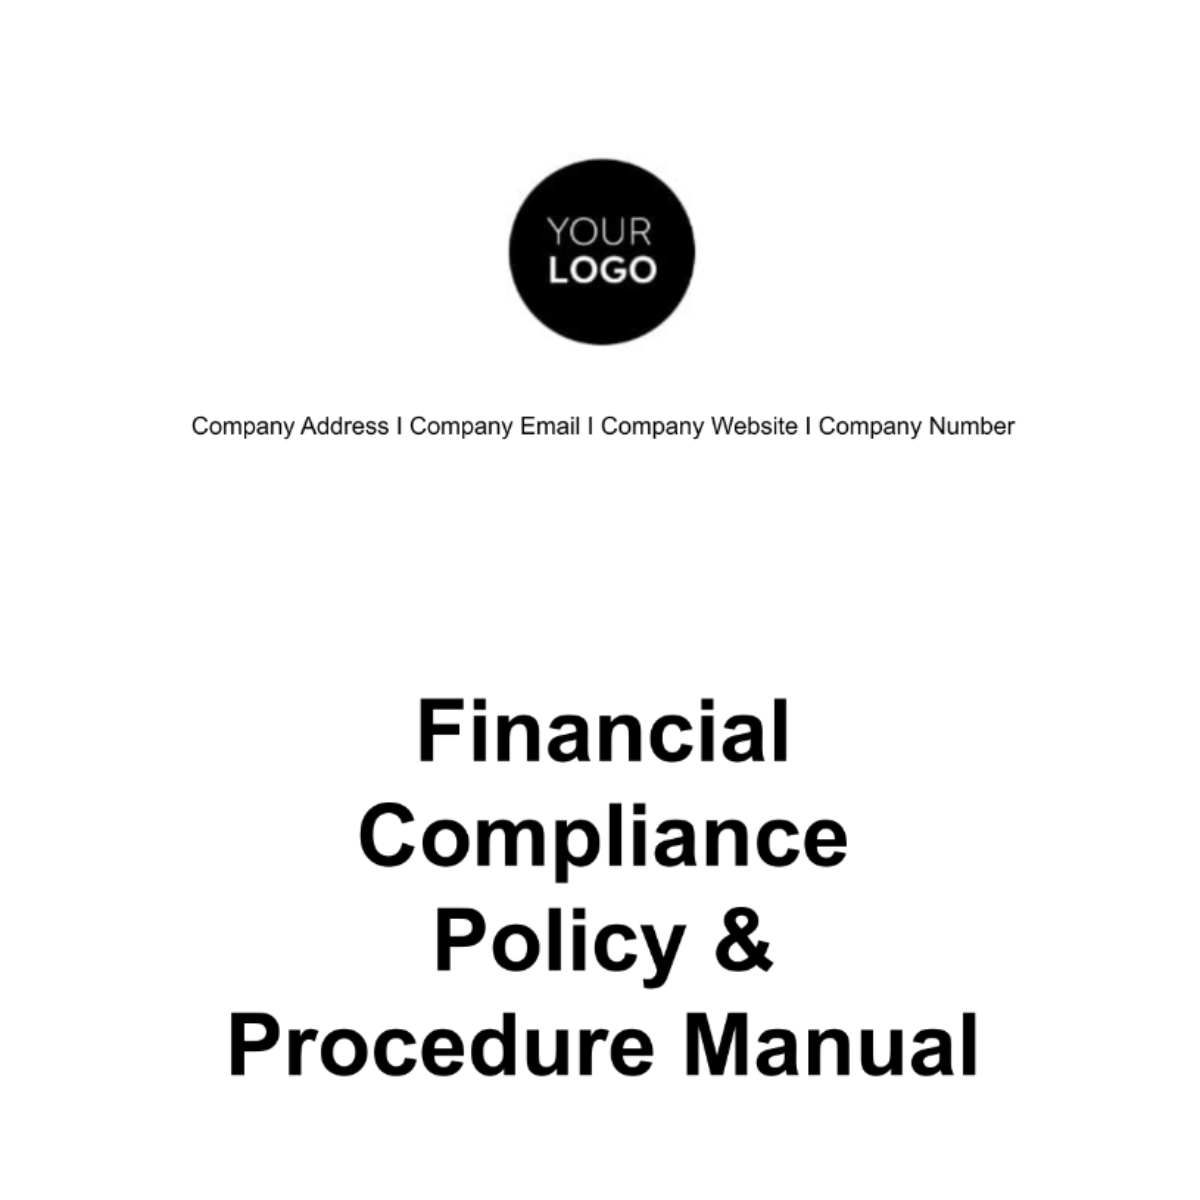 Financial Compliance Policy & Procedure Manual Template